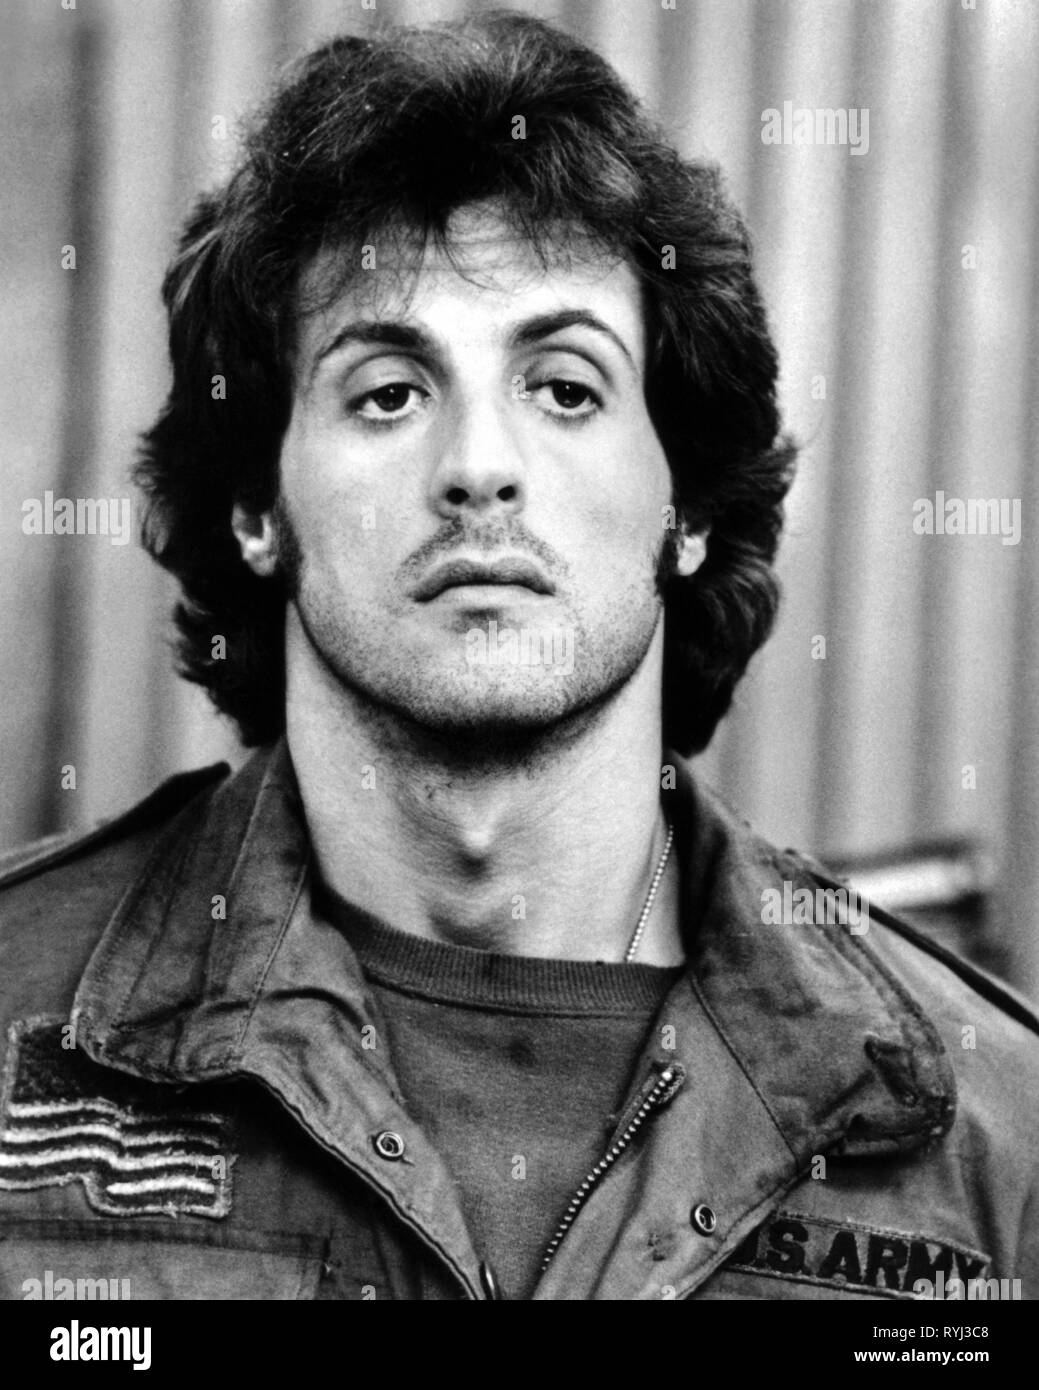 SYLVESTER STALLONE, FIRST BLOOD, 1982 Stock Photo - Alamy